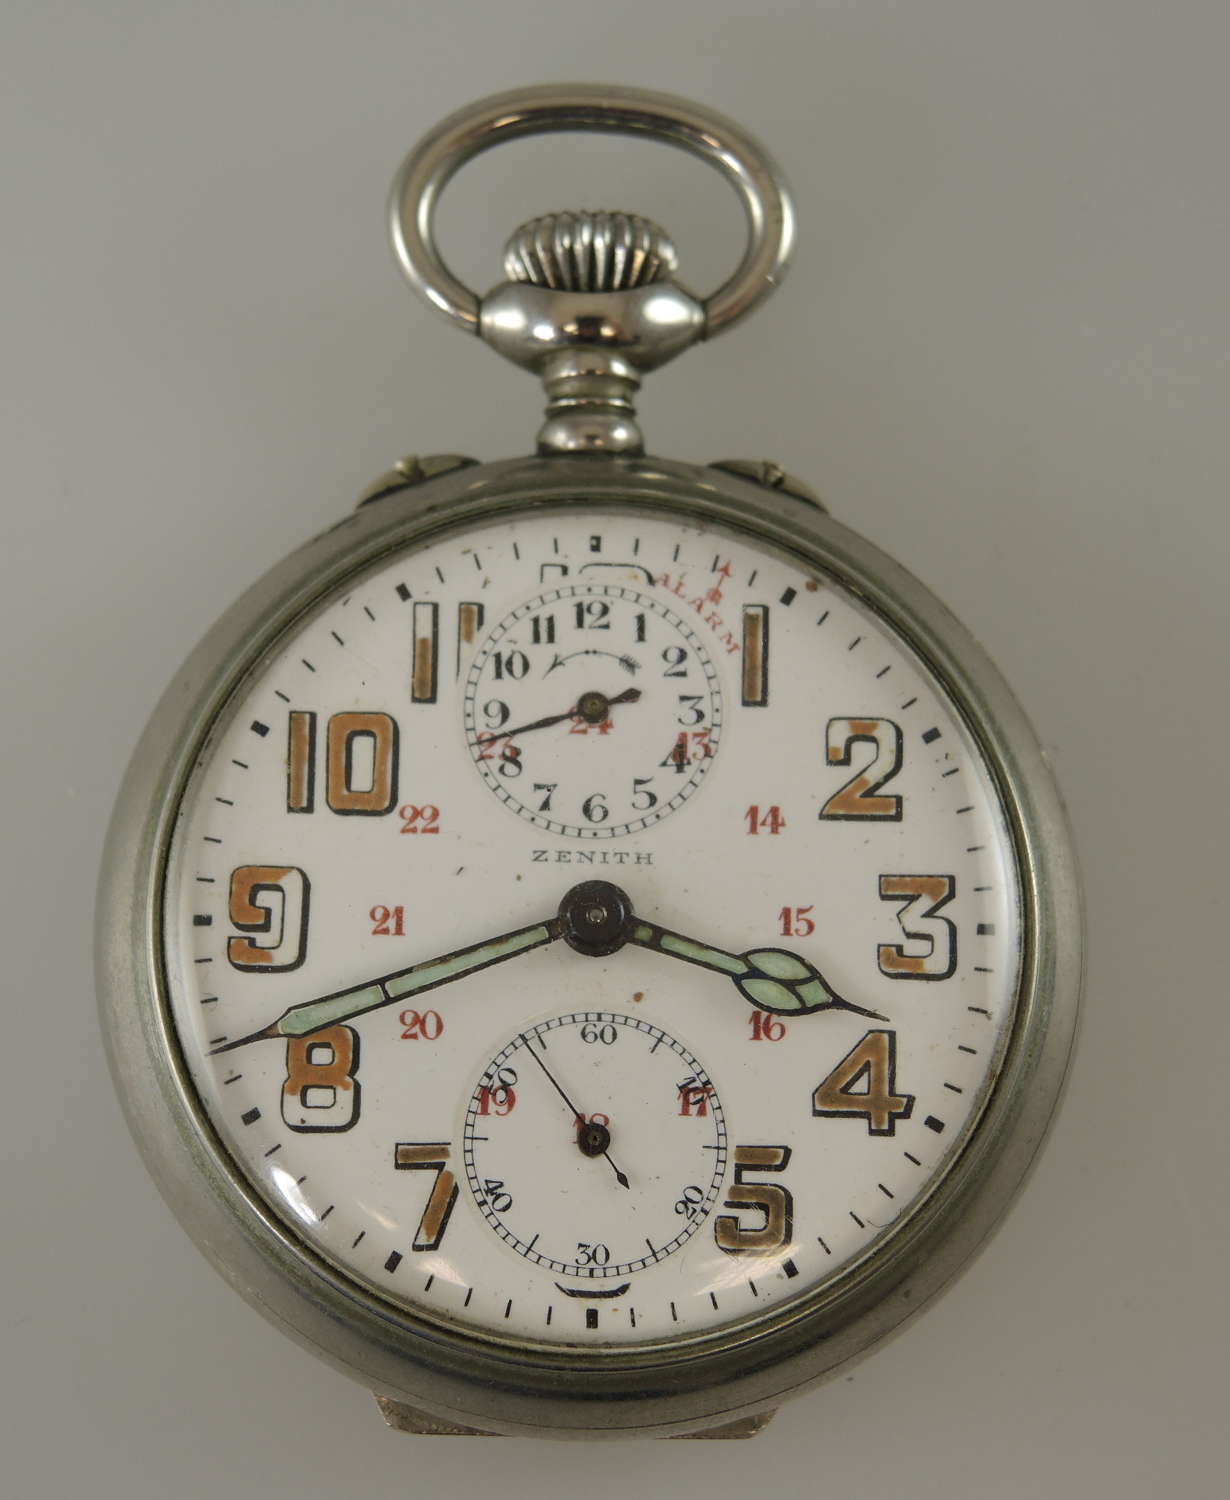 Zenith pocket watch with an alarm function c1910